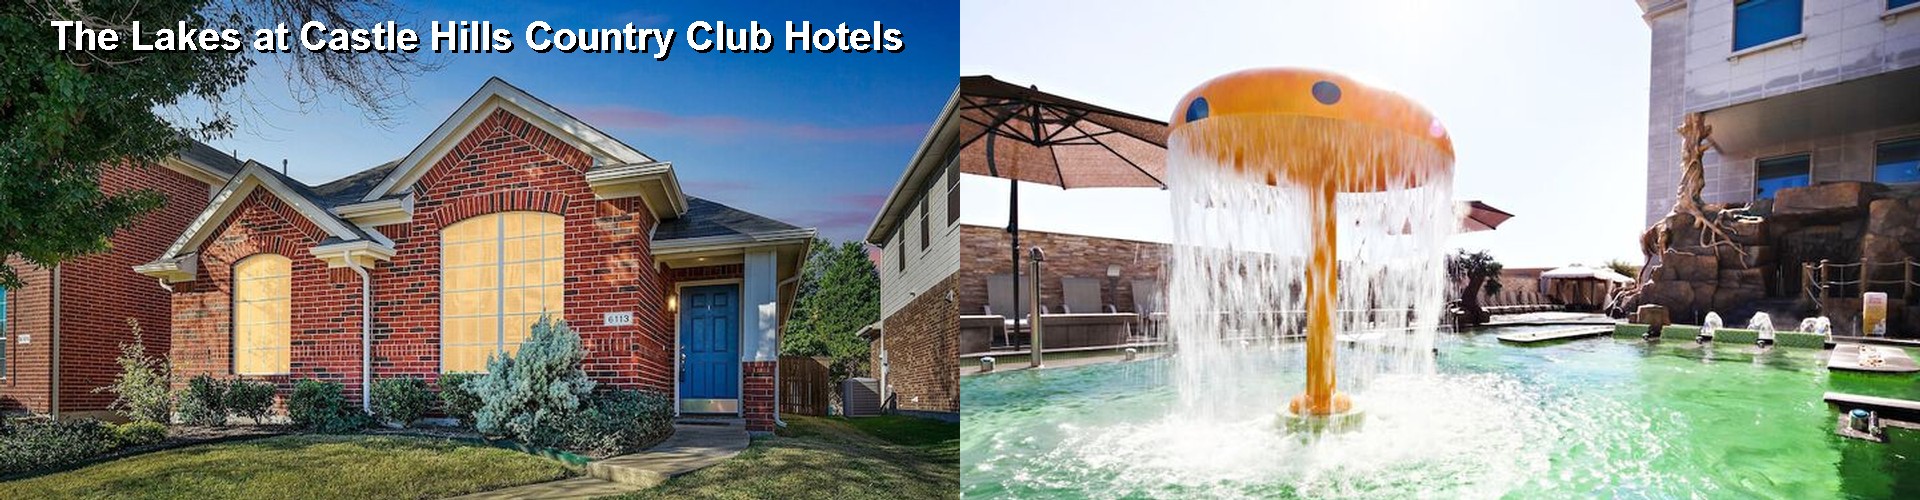 5 Best Hotels near The Lakes at Castle Hills Country Club